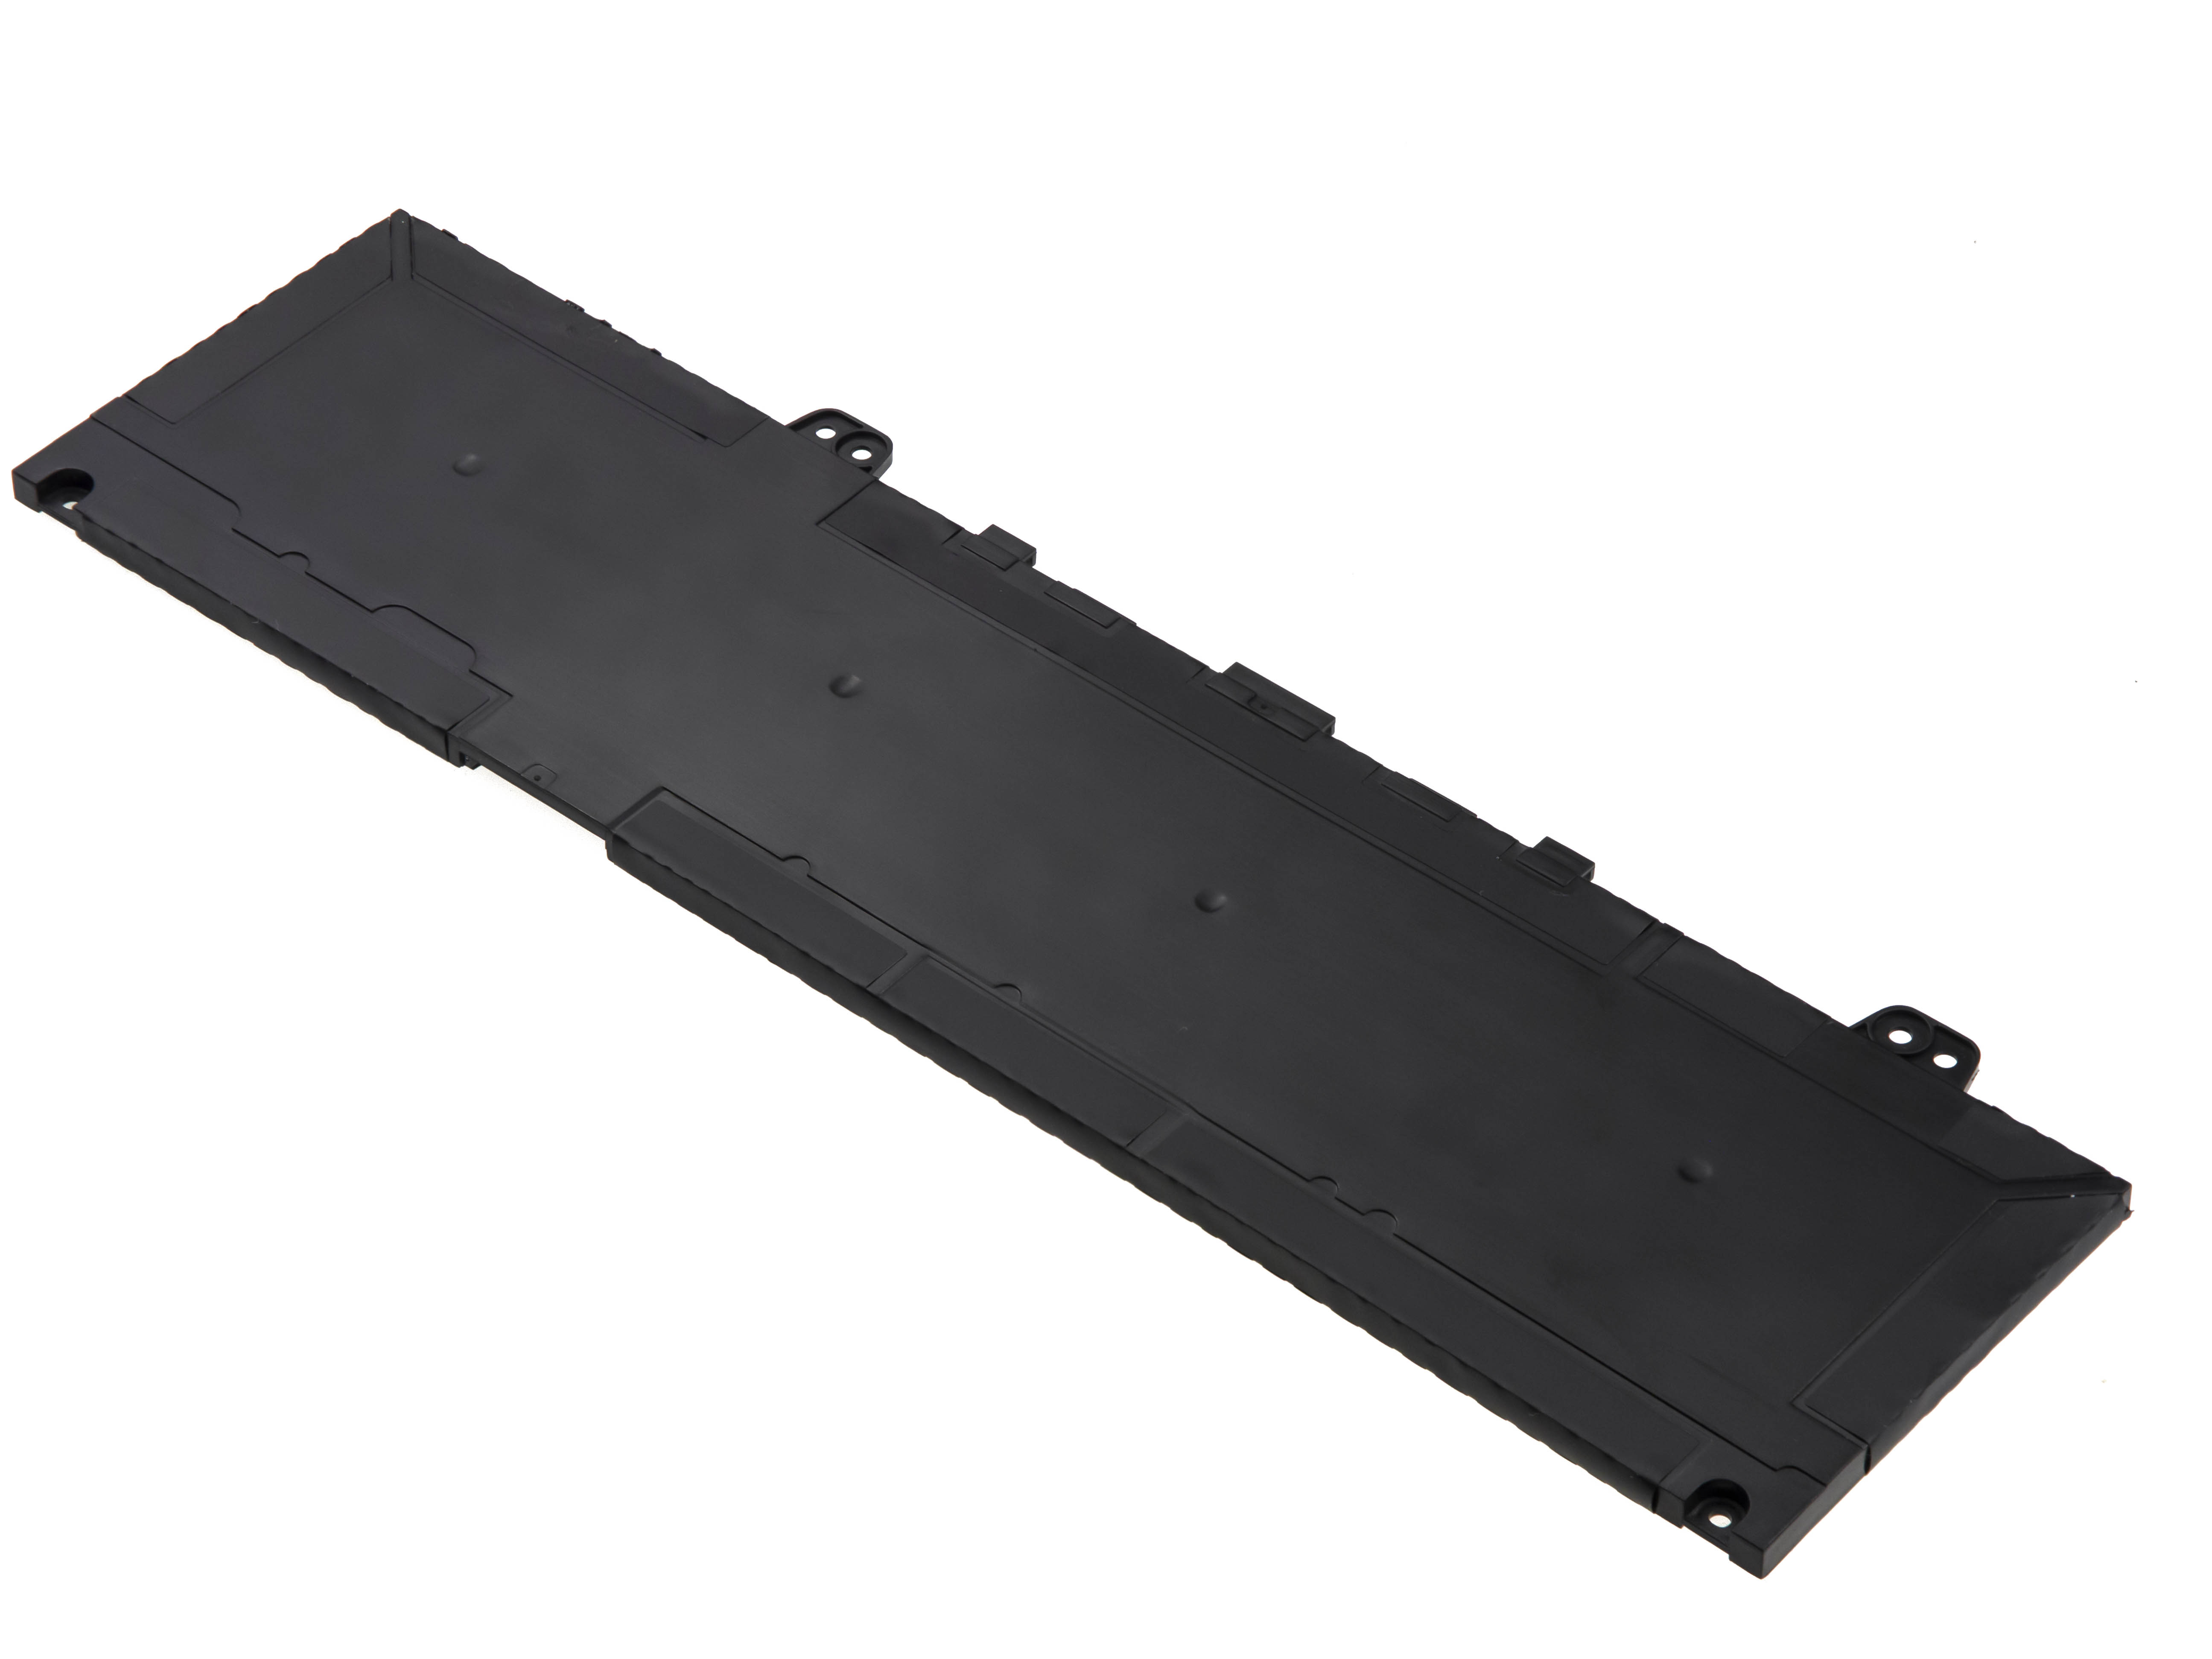 Baterie T6 Power Dell Insprion 13 5370, 7370, 7373, 7386, Vostro 5370, 3330mAh, 38Wh, 3cell, Li-pol 